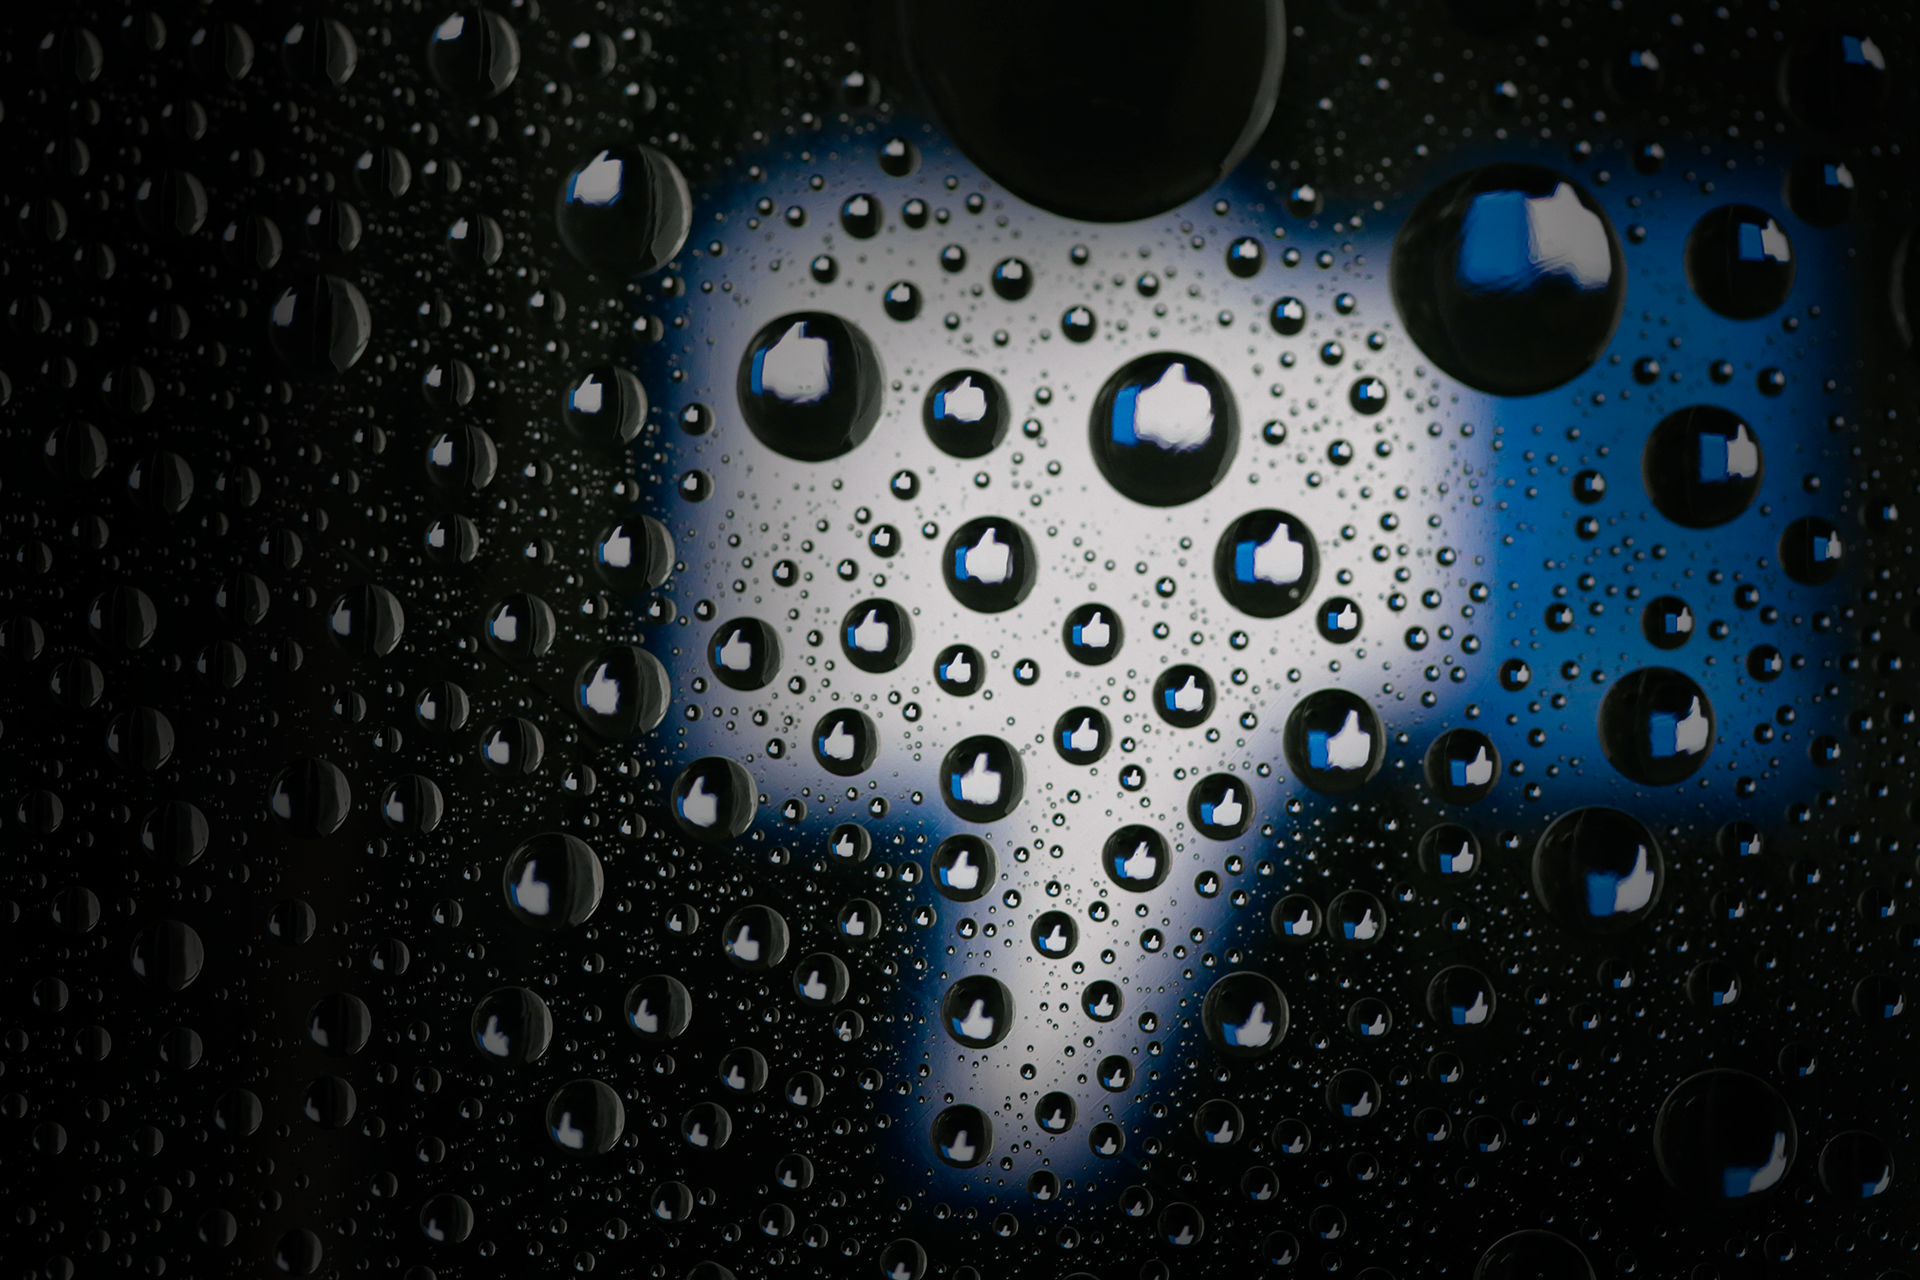 Photo of rain drops with the Facebook like icon thumbs down in the background